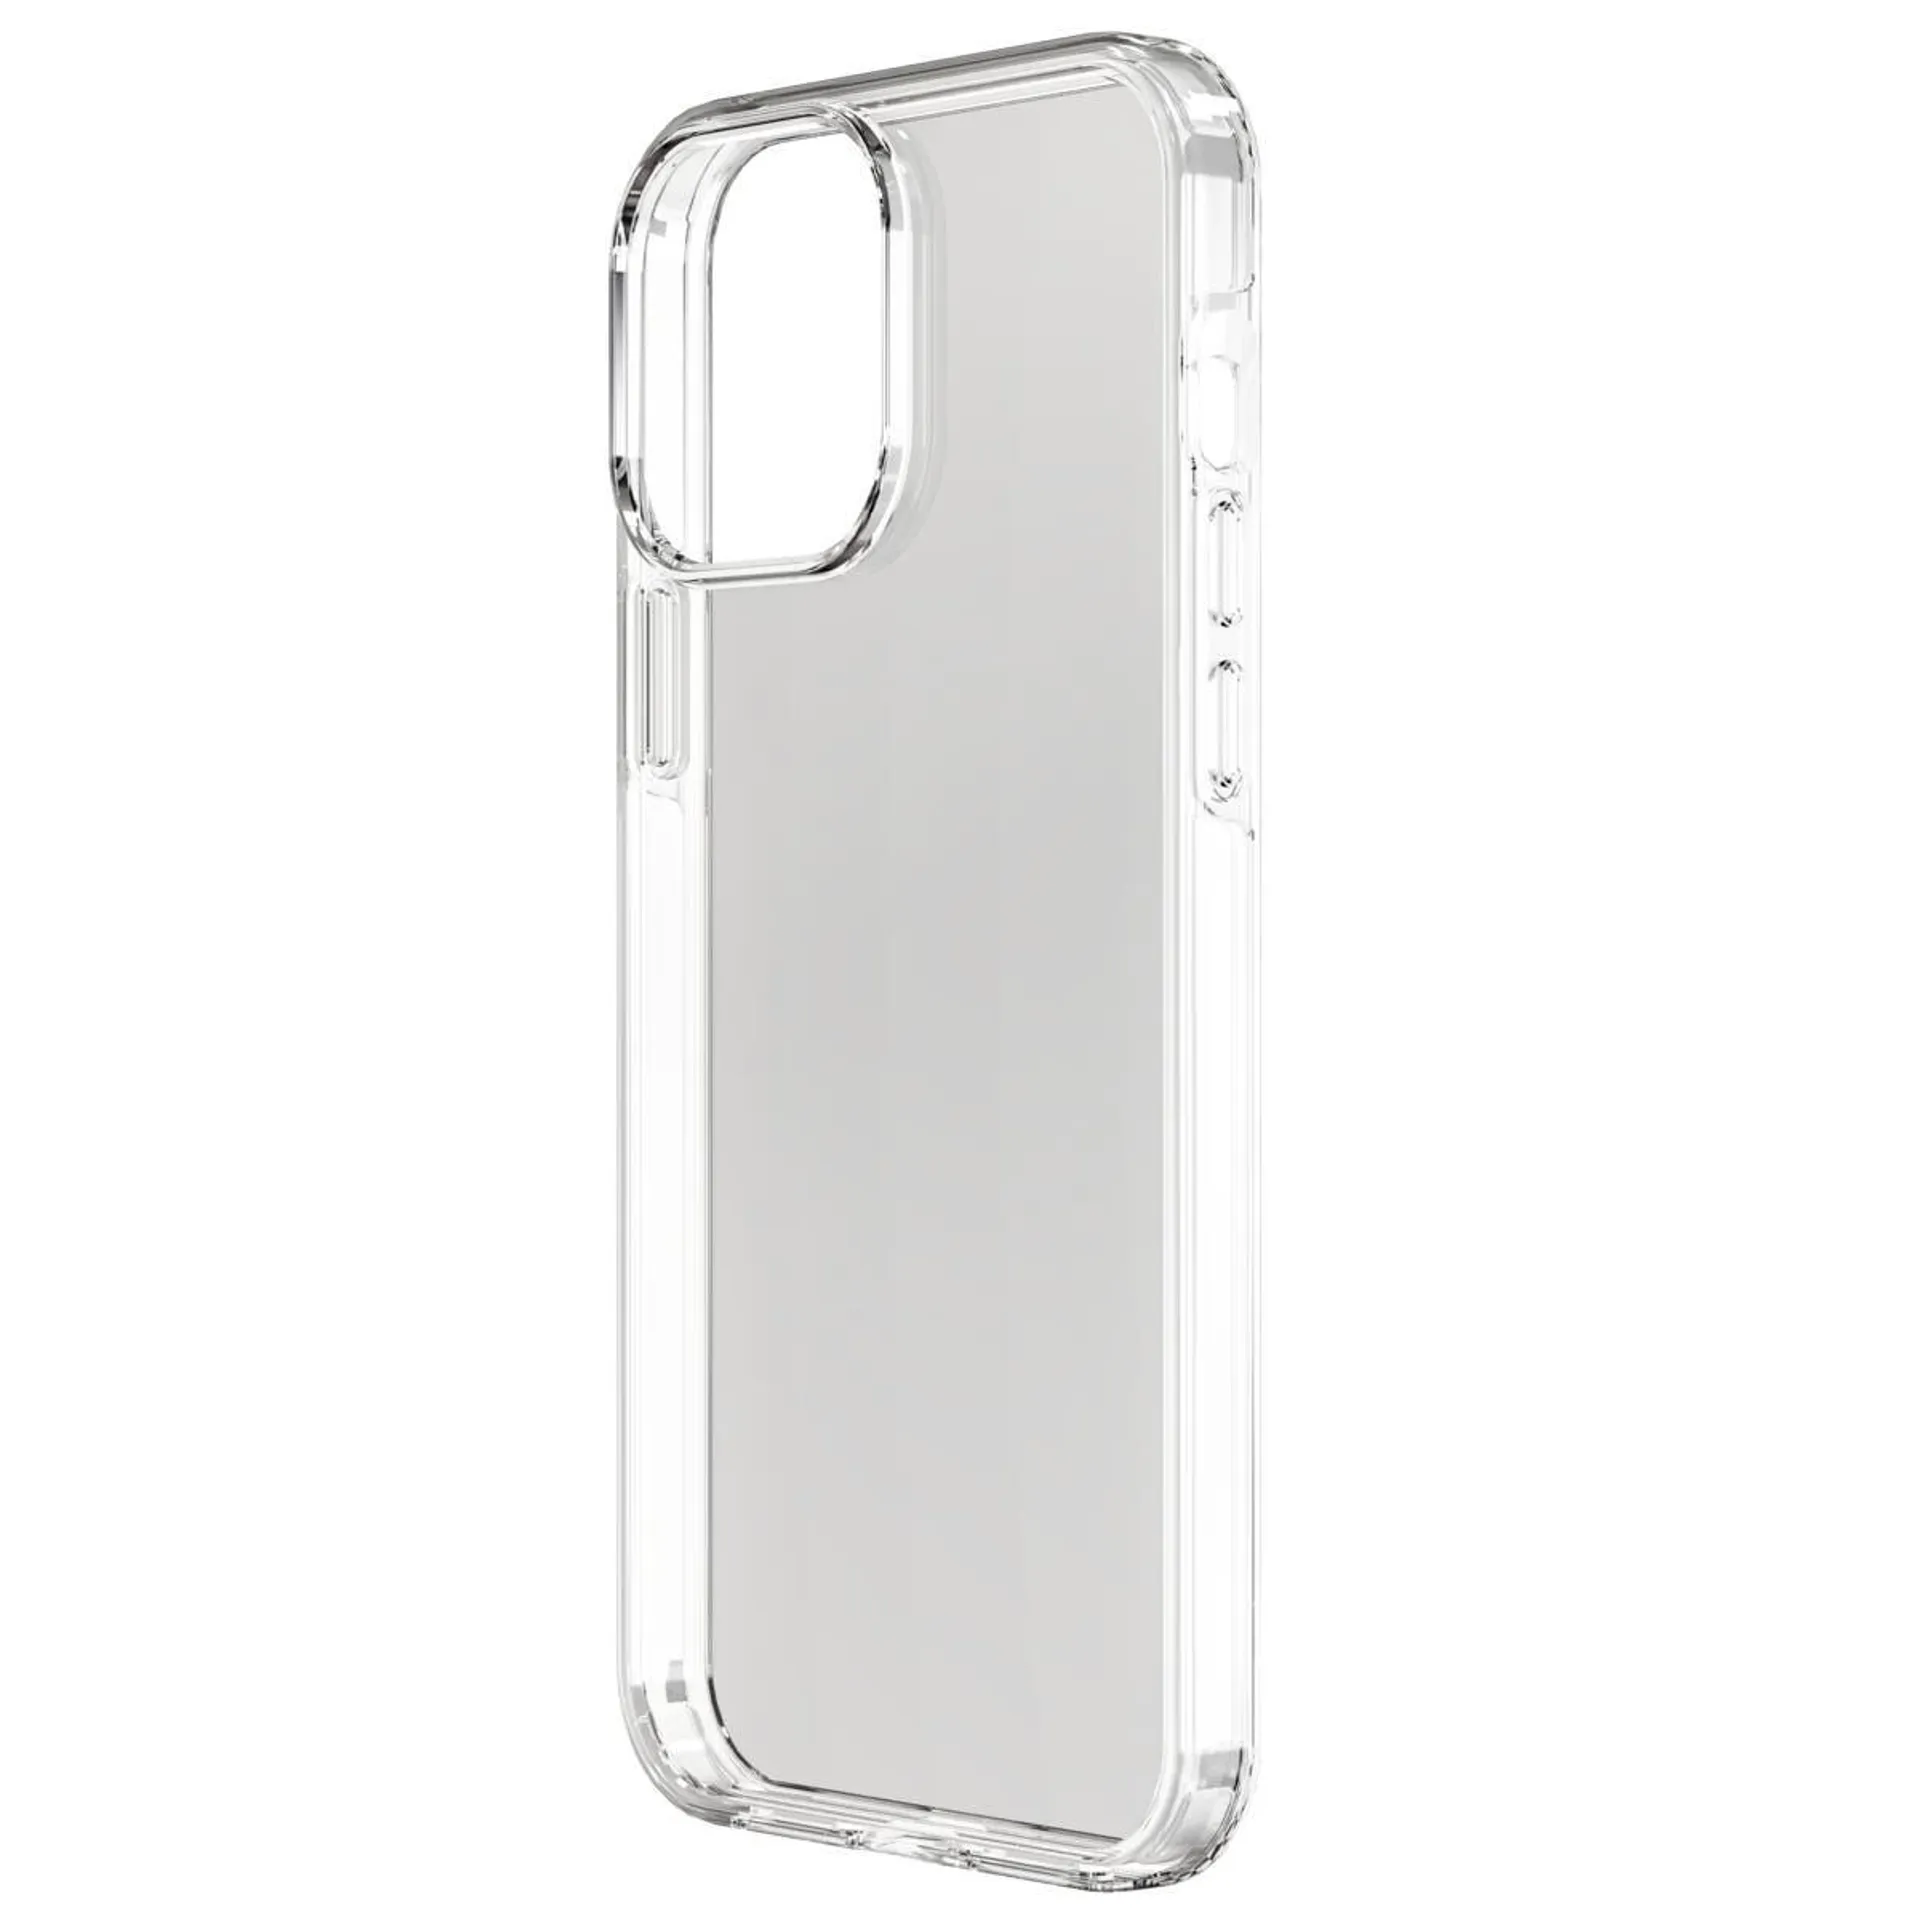 Moov Drop Protection Case for iPhone 13 Pro Max - Clear